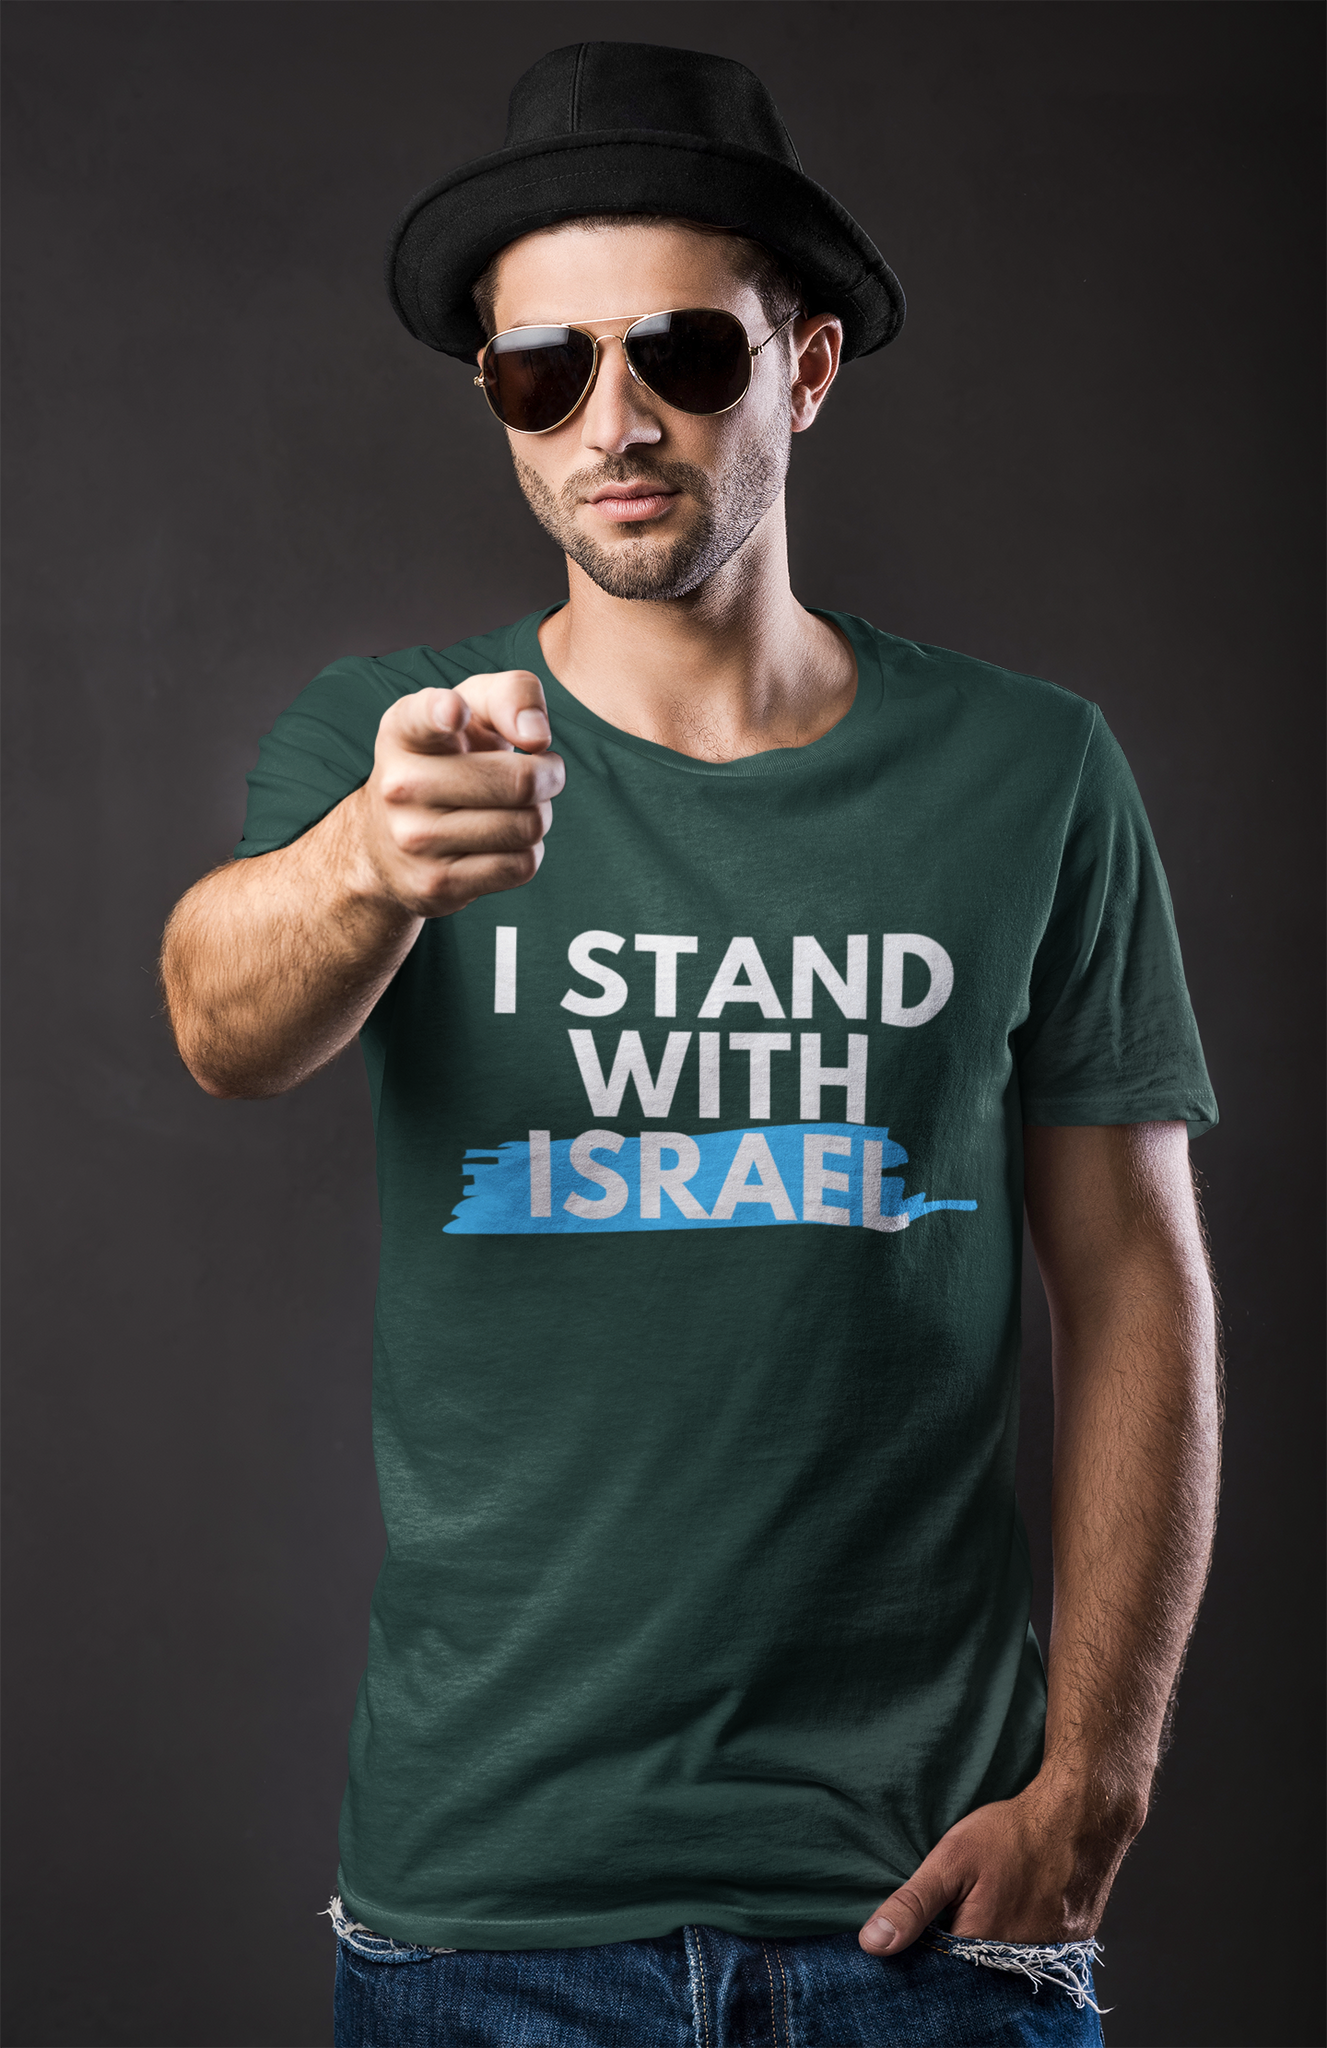 I Stand With Israel T-Shirt Men